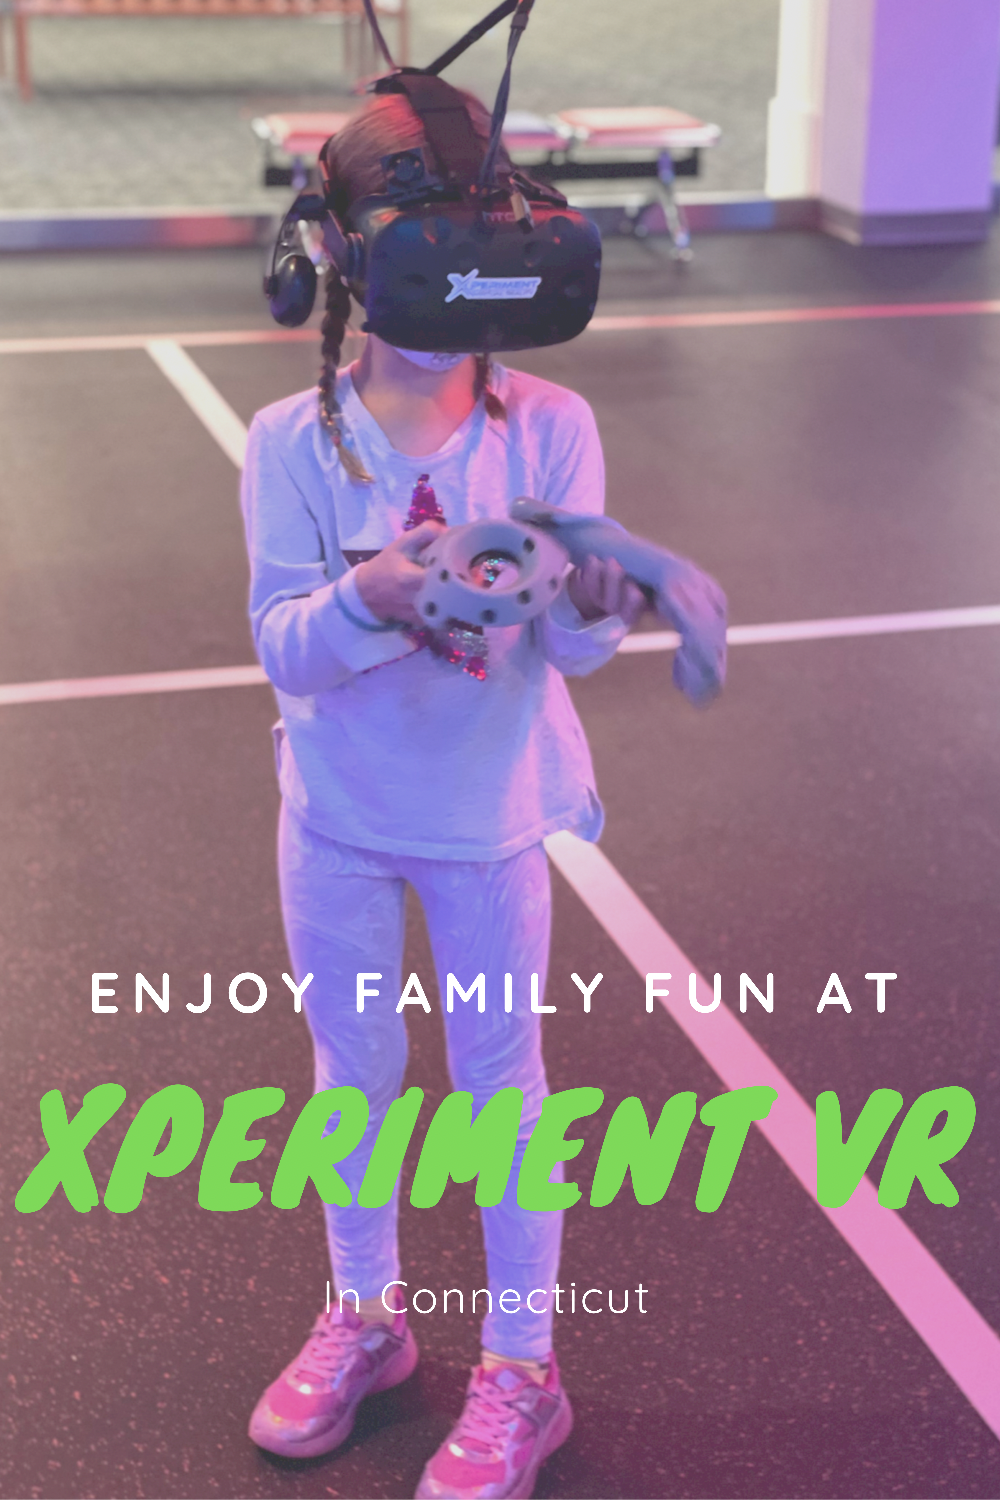 visit this virtual reality center with kids for indoor entertainment